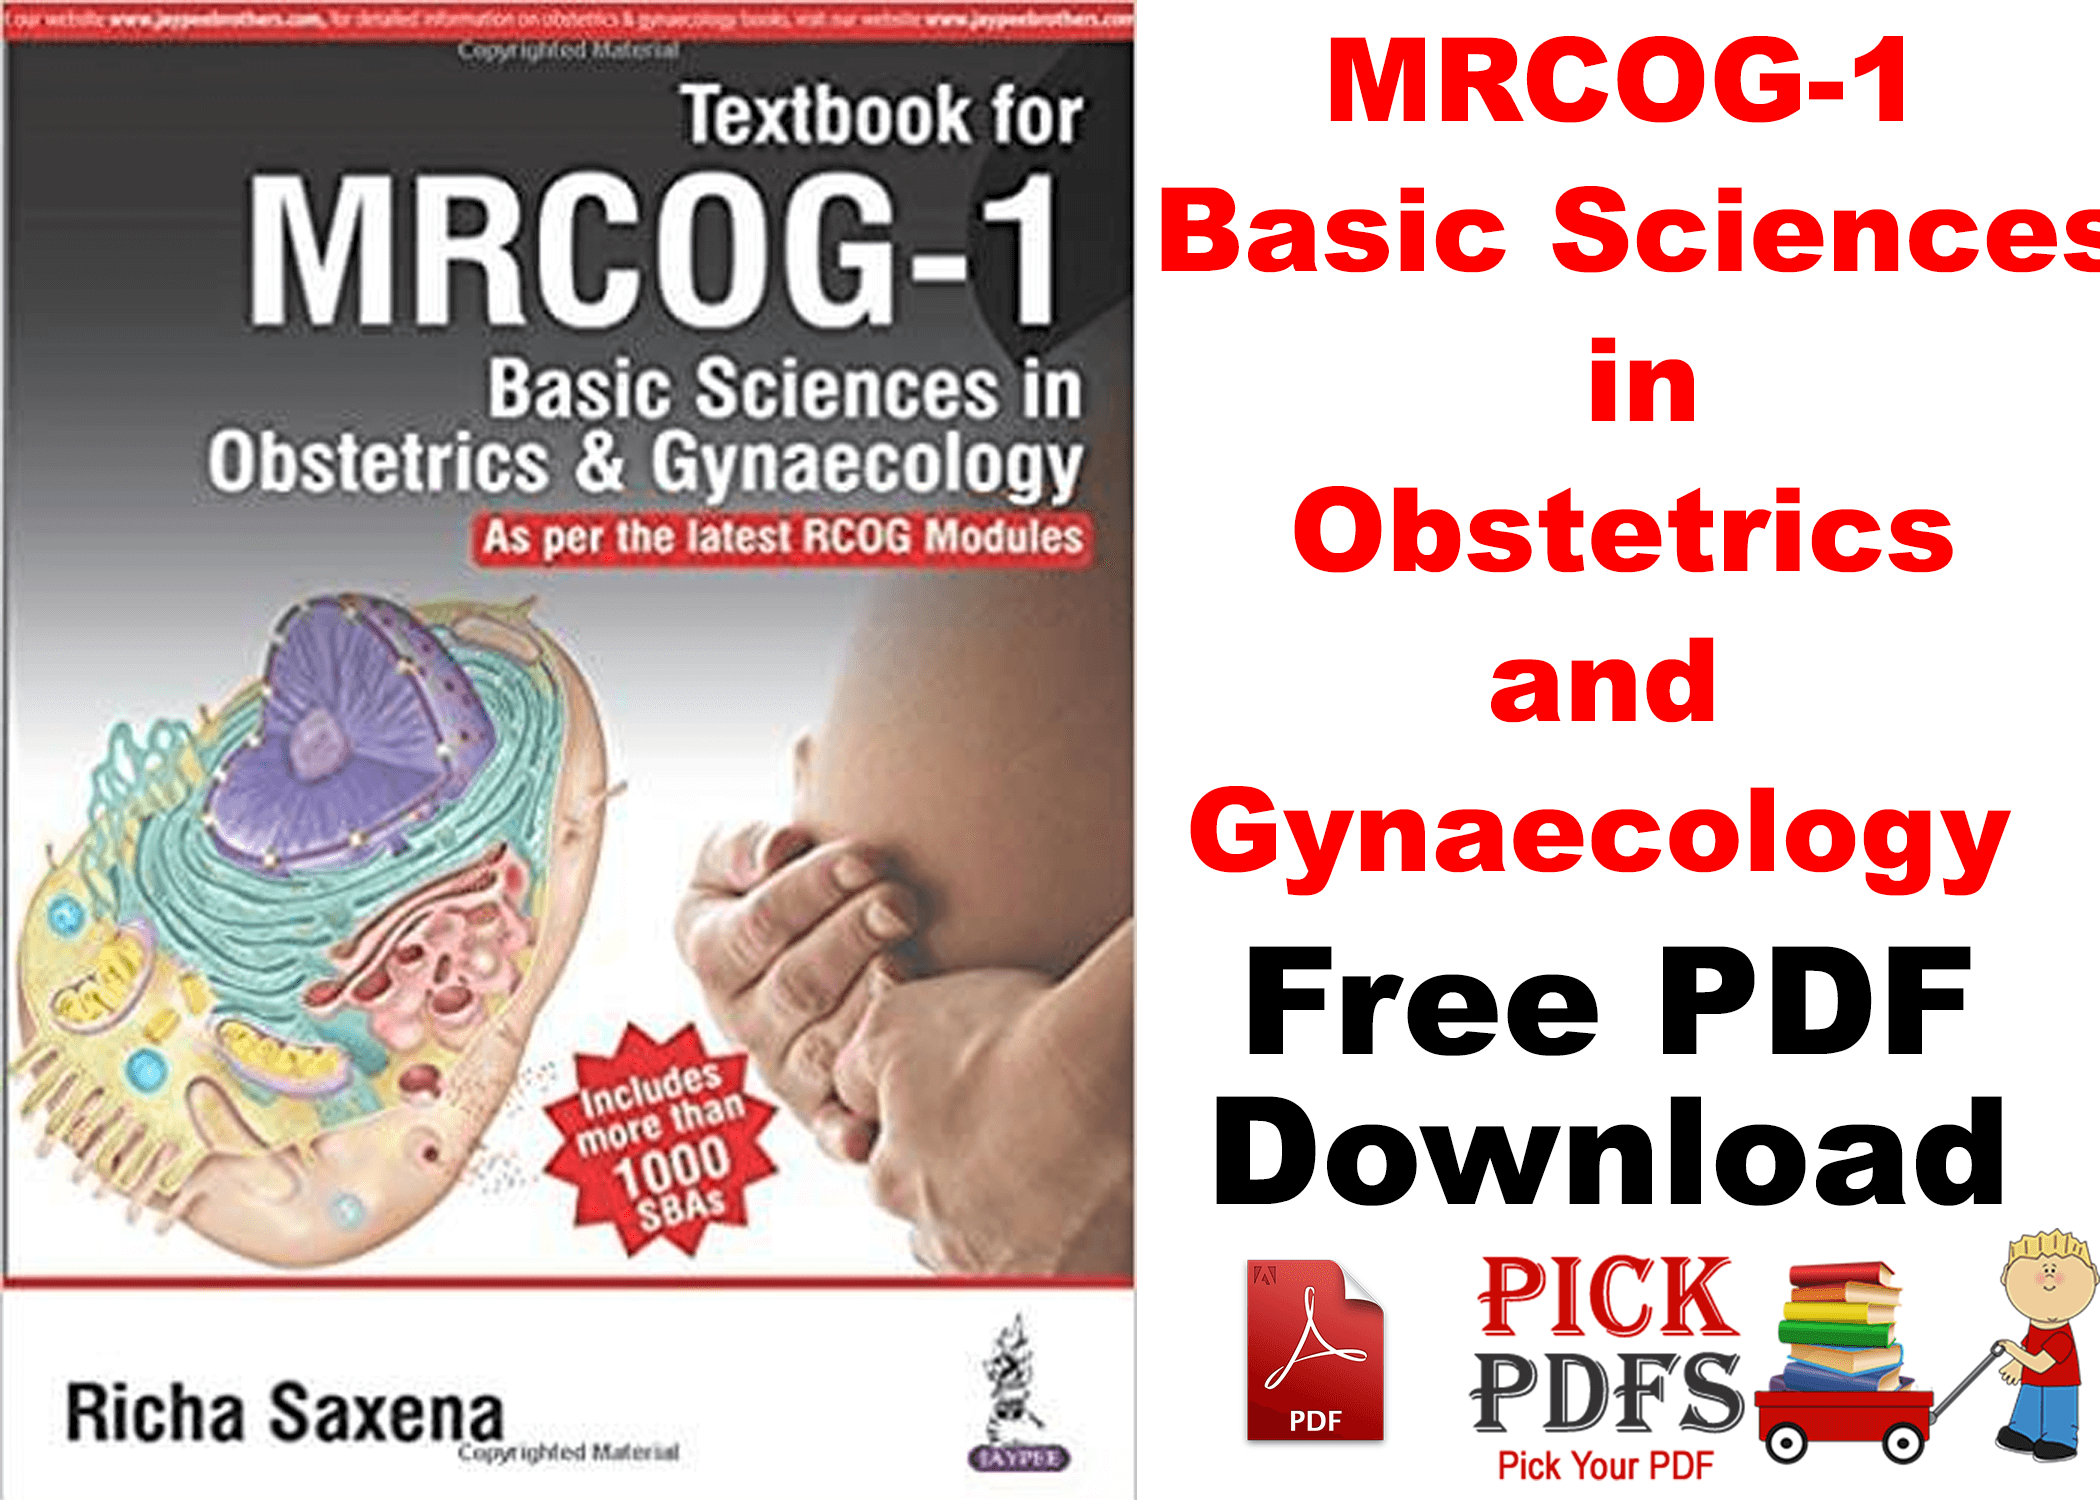 https://pickpdfs.com/mrcog-1-basic-sciences-in-obstetrics-and-gynaecology-free-pdf-download/